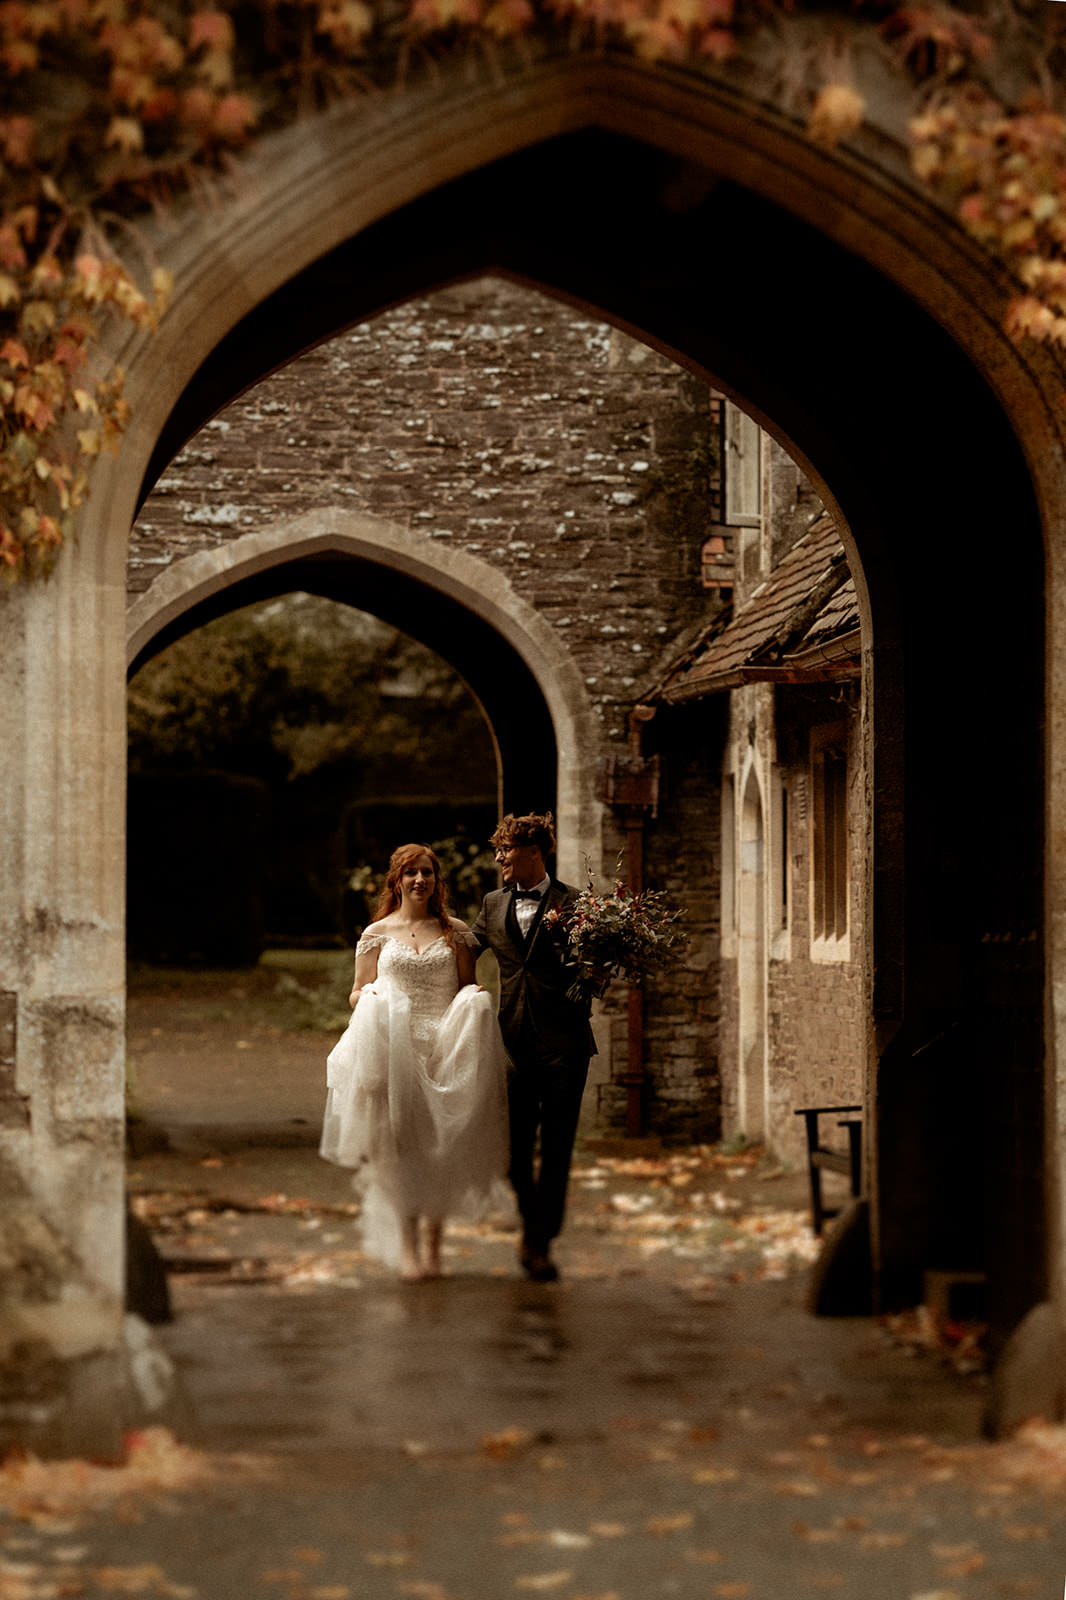 Romantic Wedding Photography in Wales at Treberfydd House